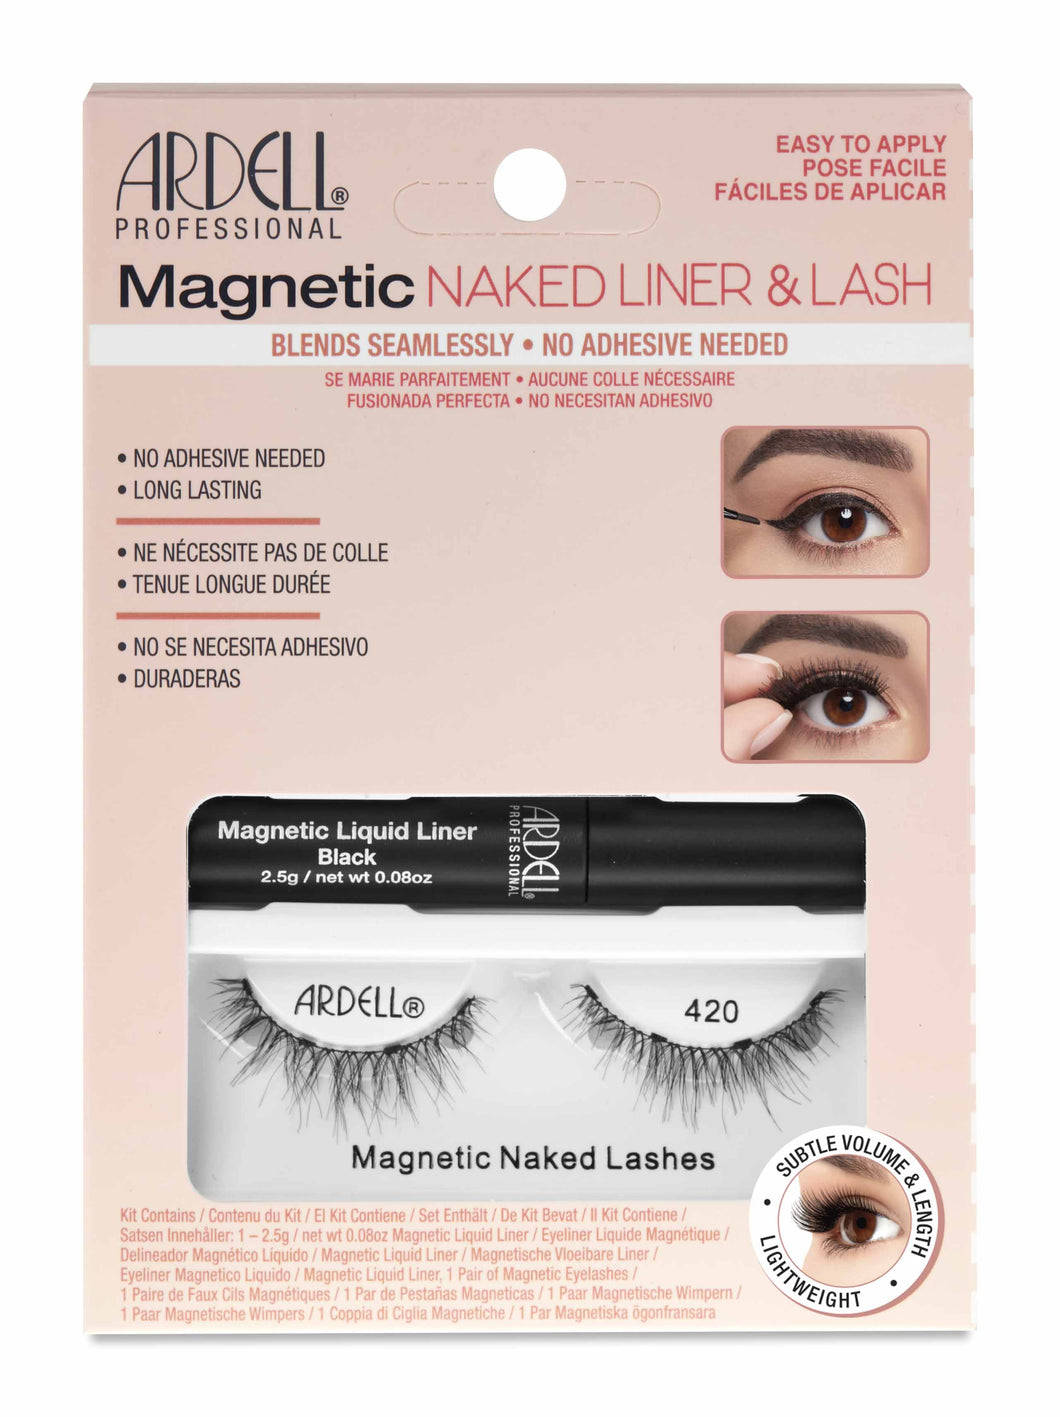 Ardell Magnetic Naked Liner and Lash - 420 - Professional Salon Brands